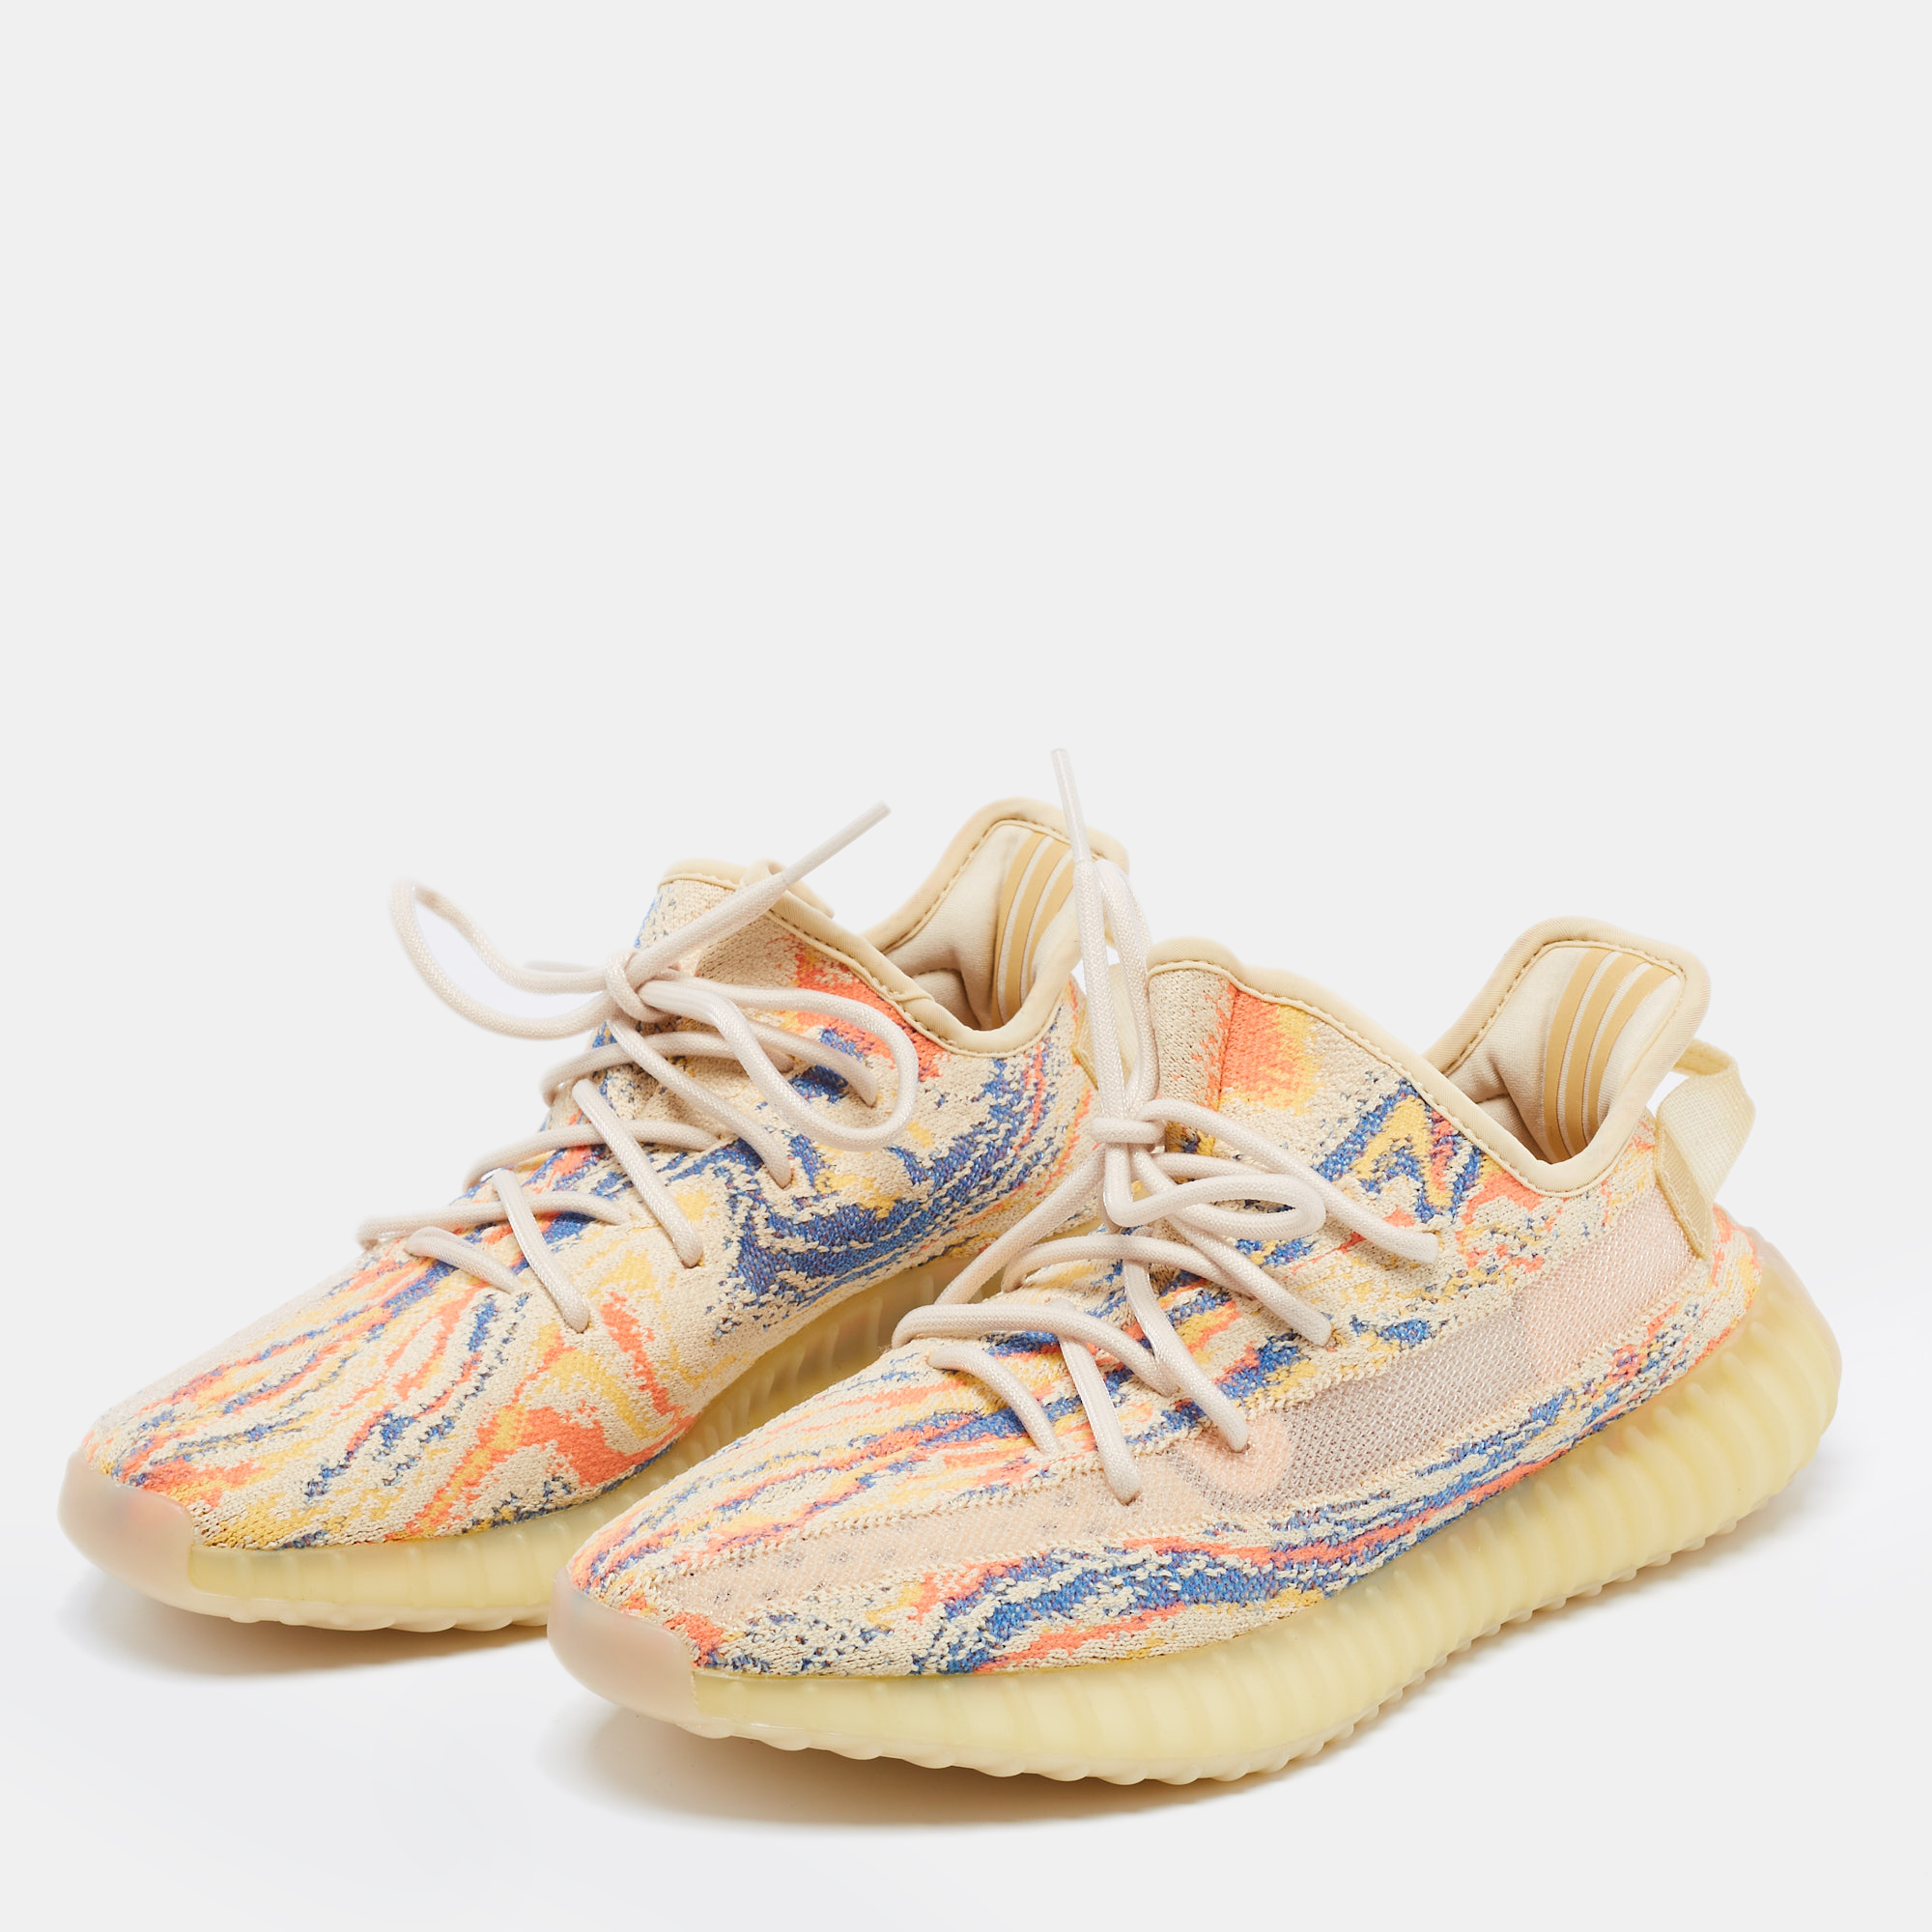 

Yeezy x adidas Multicolor Knit Fabric Boost-350-v2-Mx-Oat Sneakers Size 40 2/3